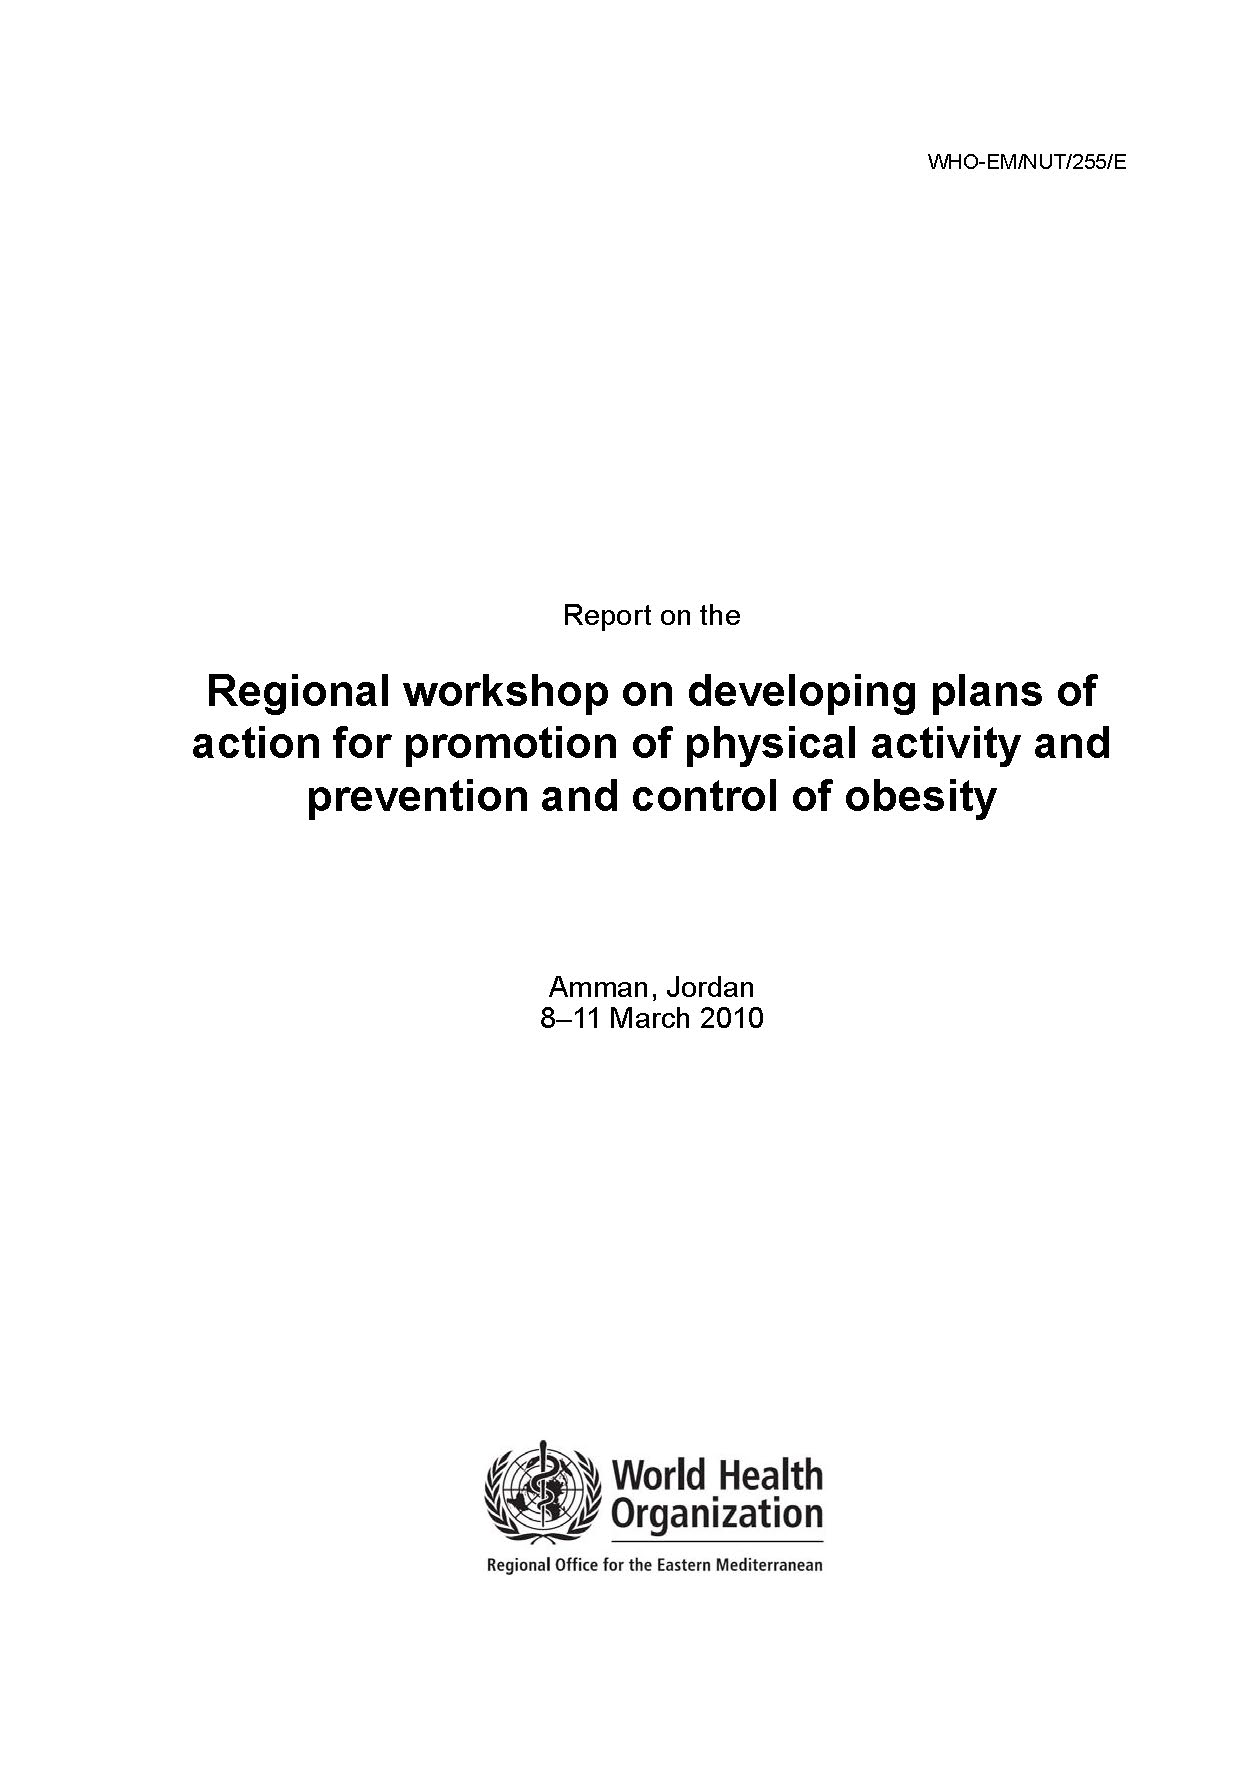 report_on_the_regional_workshop_on_developing_plans_of_action_for_promotion_of_physical_activity_and_prevention_and_control_of_obesity